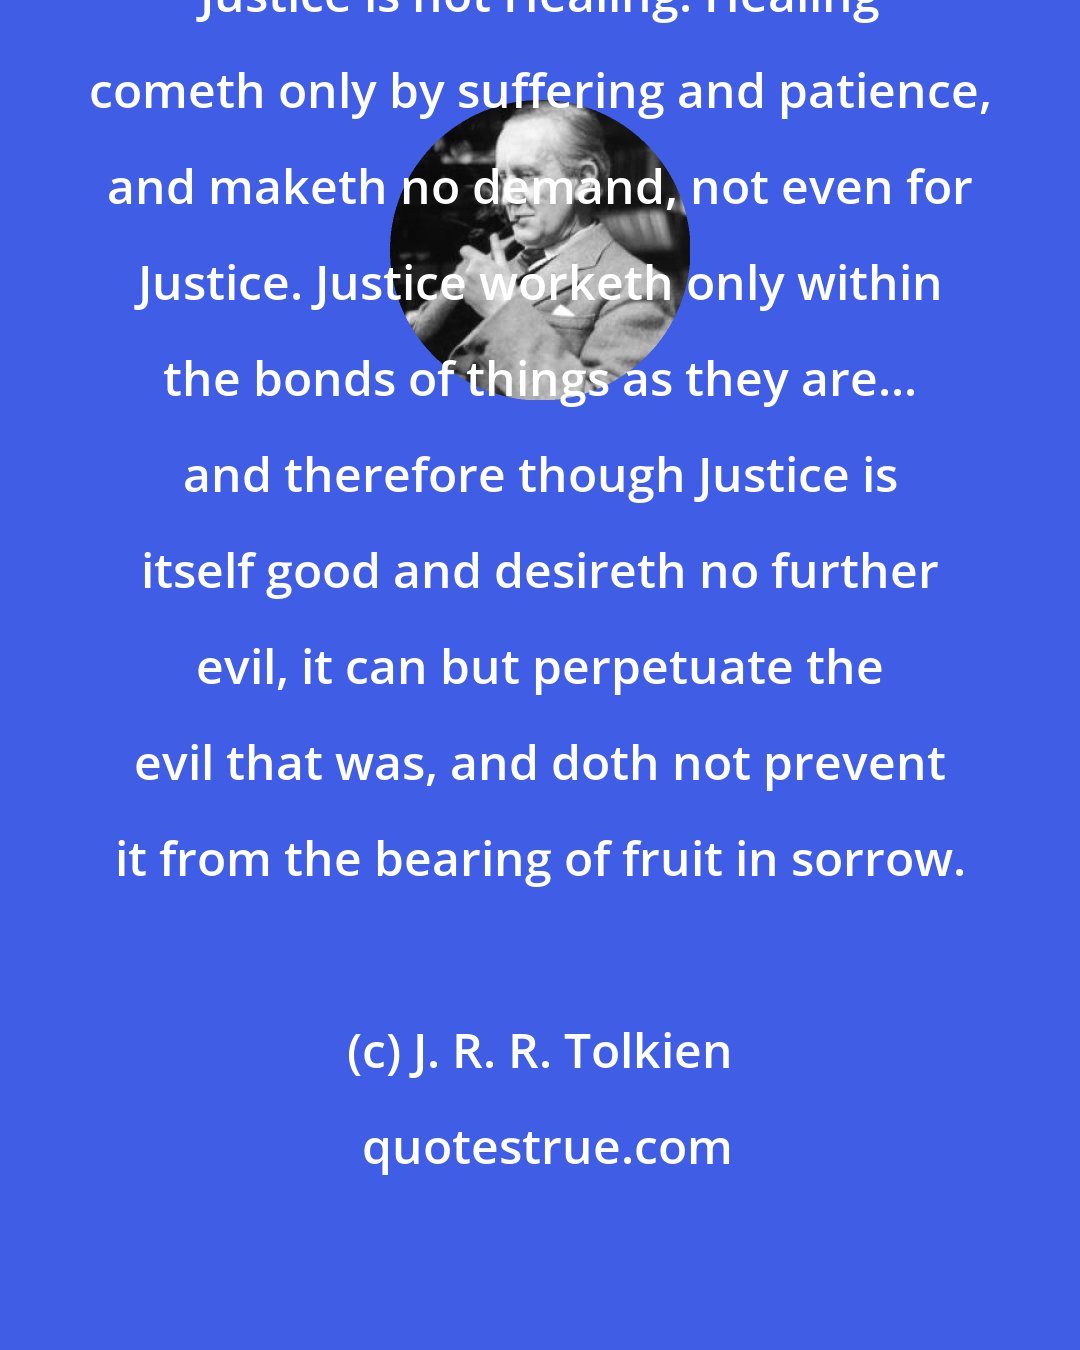 J. R. R. Tolkien: Justice is not Healing. Healing cometh only by suffering and patience, and maketh no demand, not even for Justice. Justice worketh only within the bonds of things as they are... and therefore though Justice is itself good and desireth no further evil, it can but perpetuate the evil that was, and doth not prevent it from the bearing of fruit in sorrow.